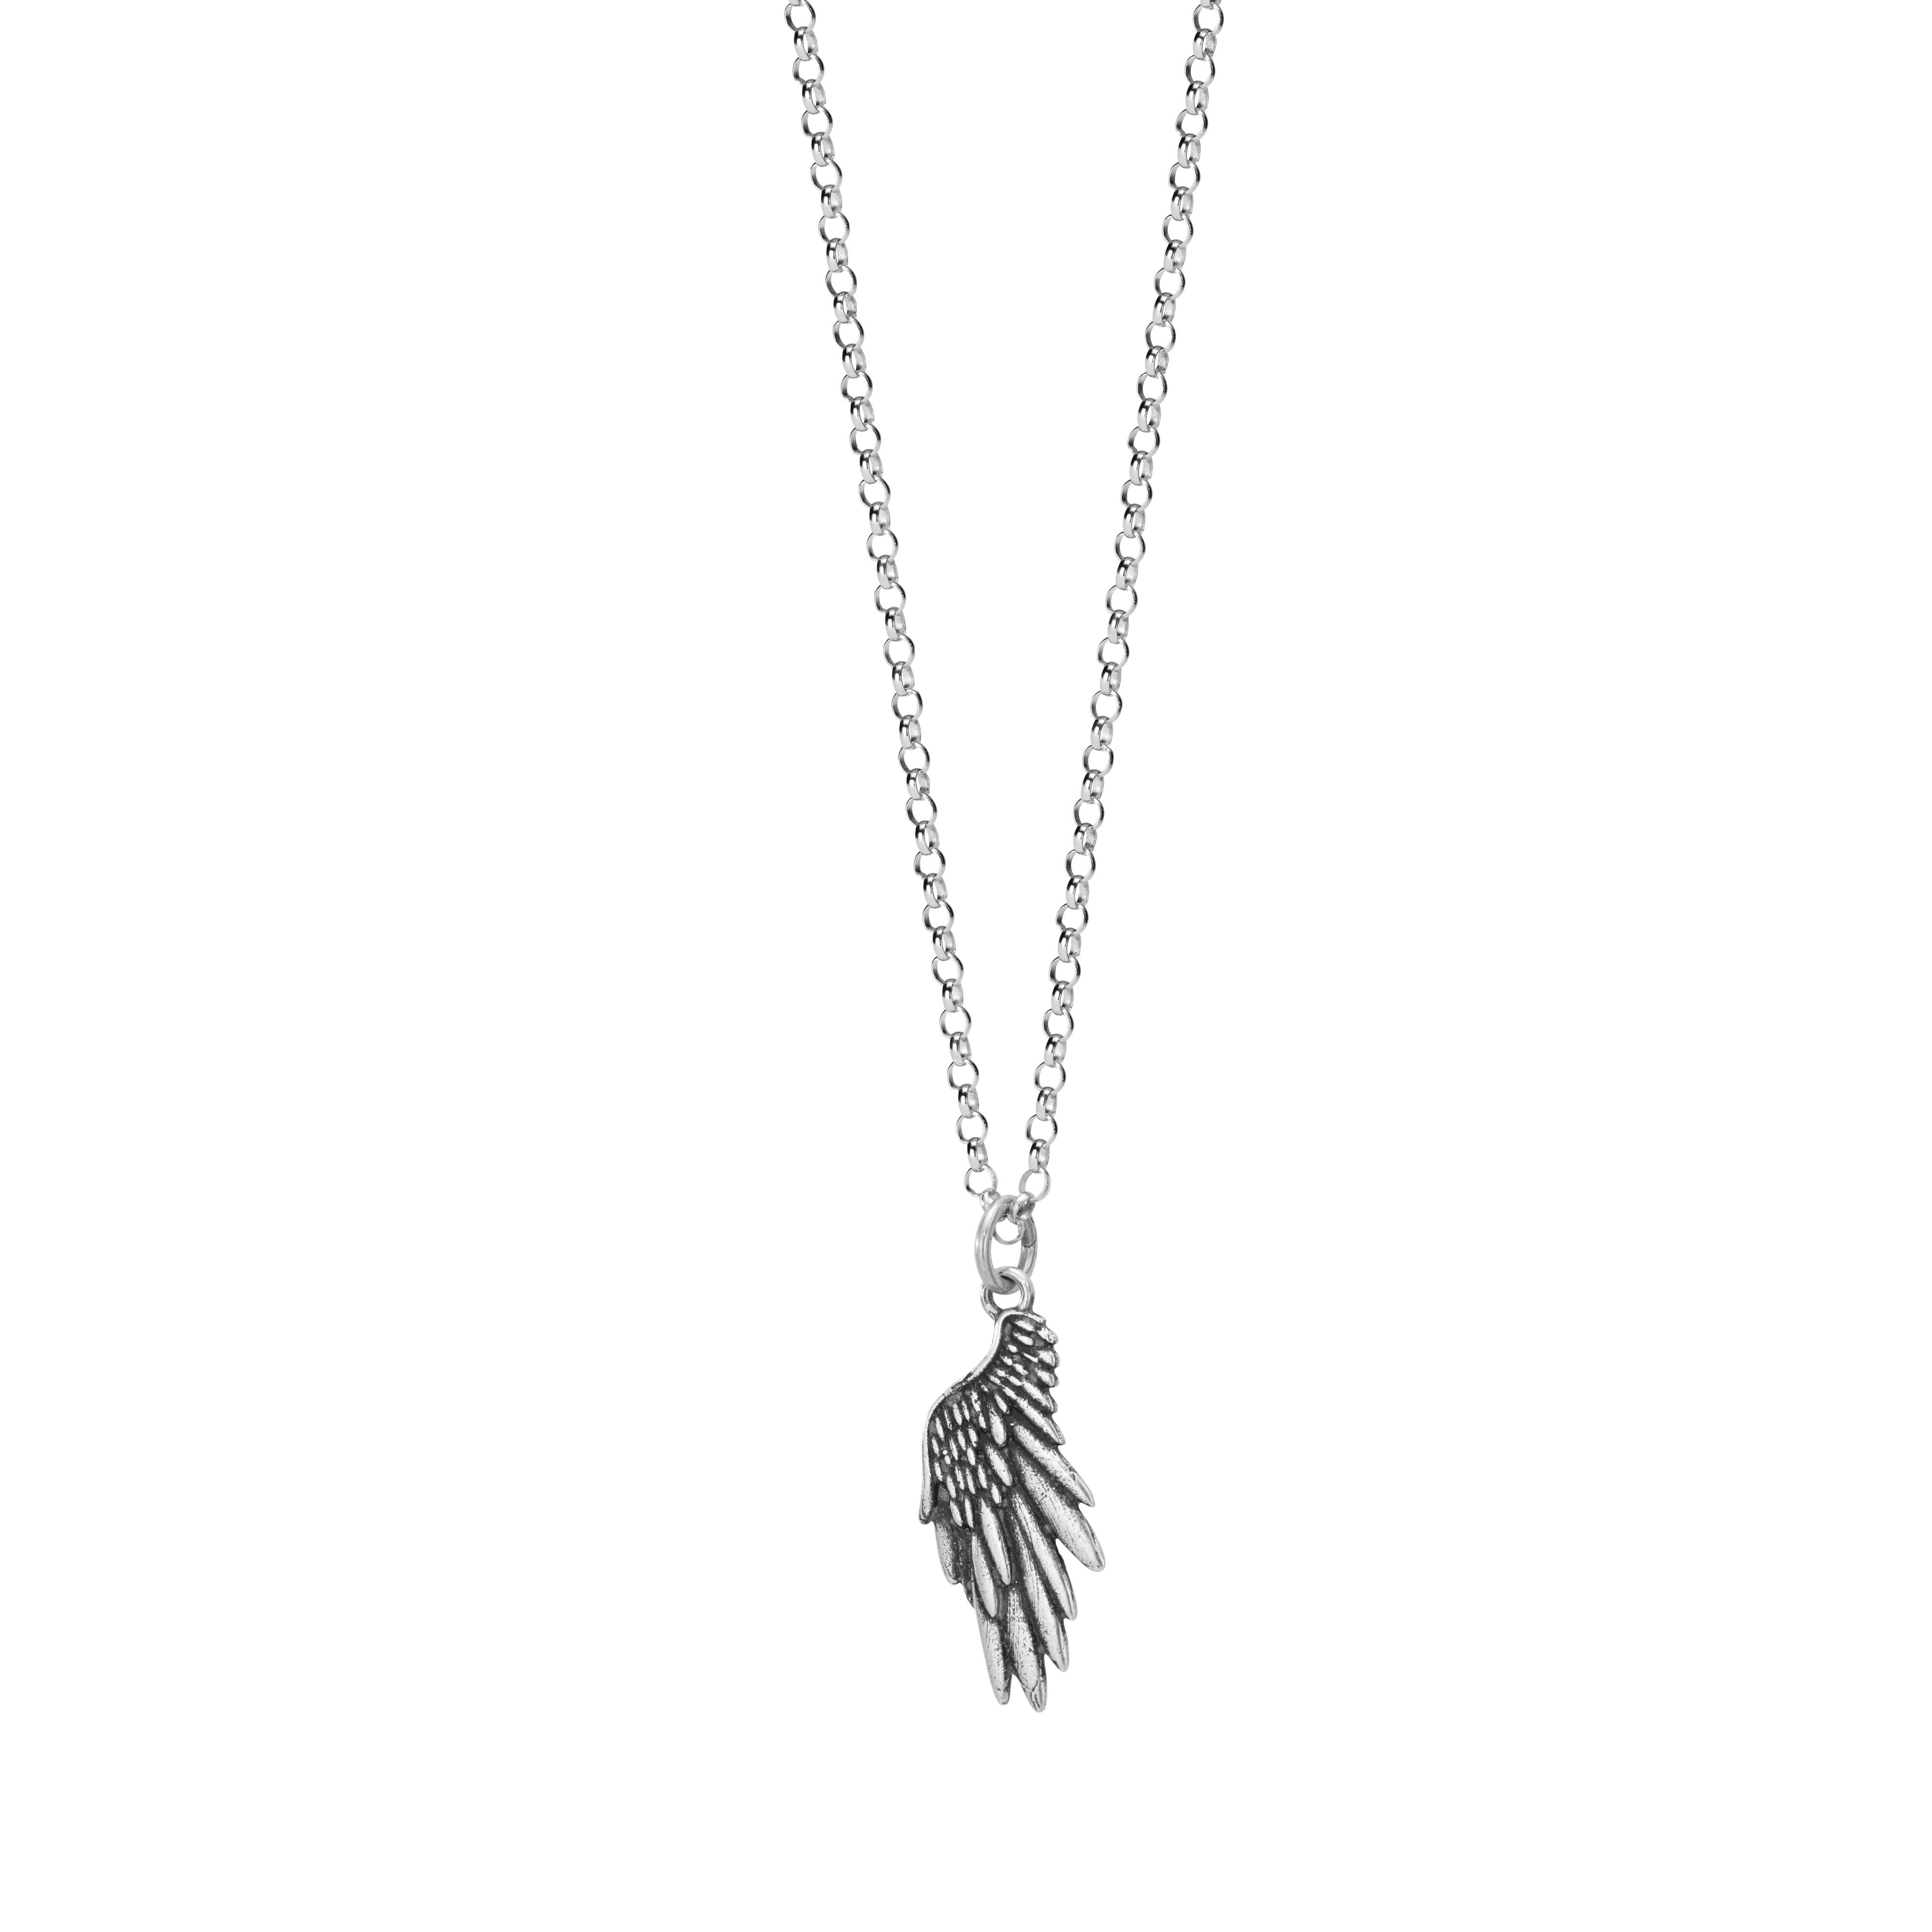 Angel Wing Necklace  Fine jewelry solid silver gold-finish necklaces  bracelets earrings